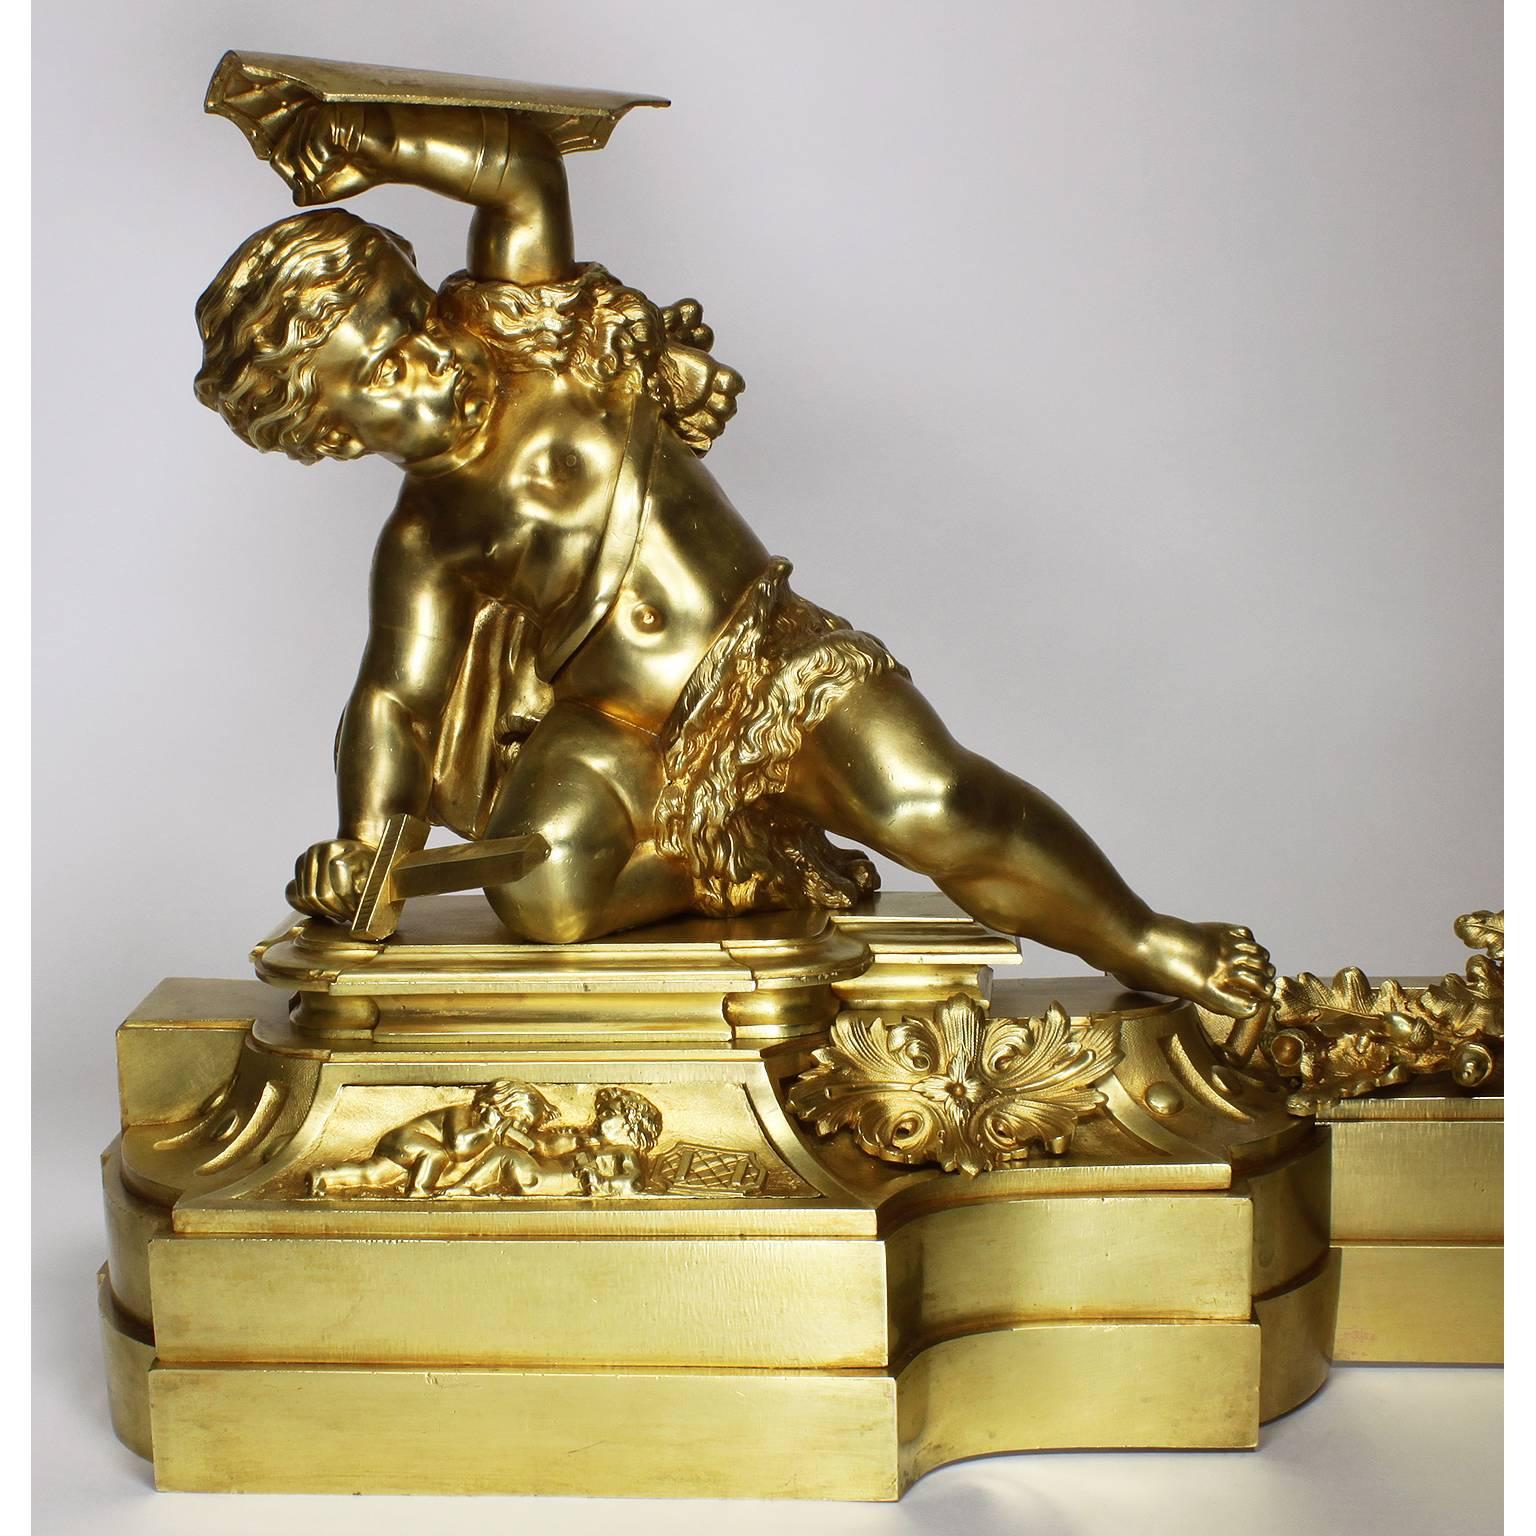 A fine and large French 19th century Louis XV style gilt bronze figural Chenet (andiron) and Fender Suite. The impressive fender surmounted on each end by a figure of playful battling armorial putto (children), one holding a sword and a shield, the